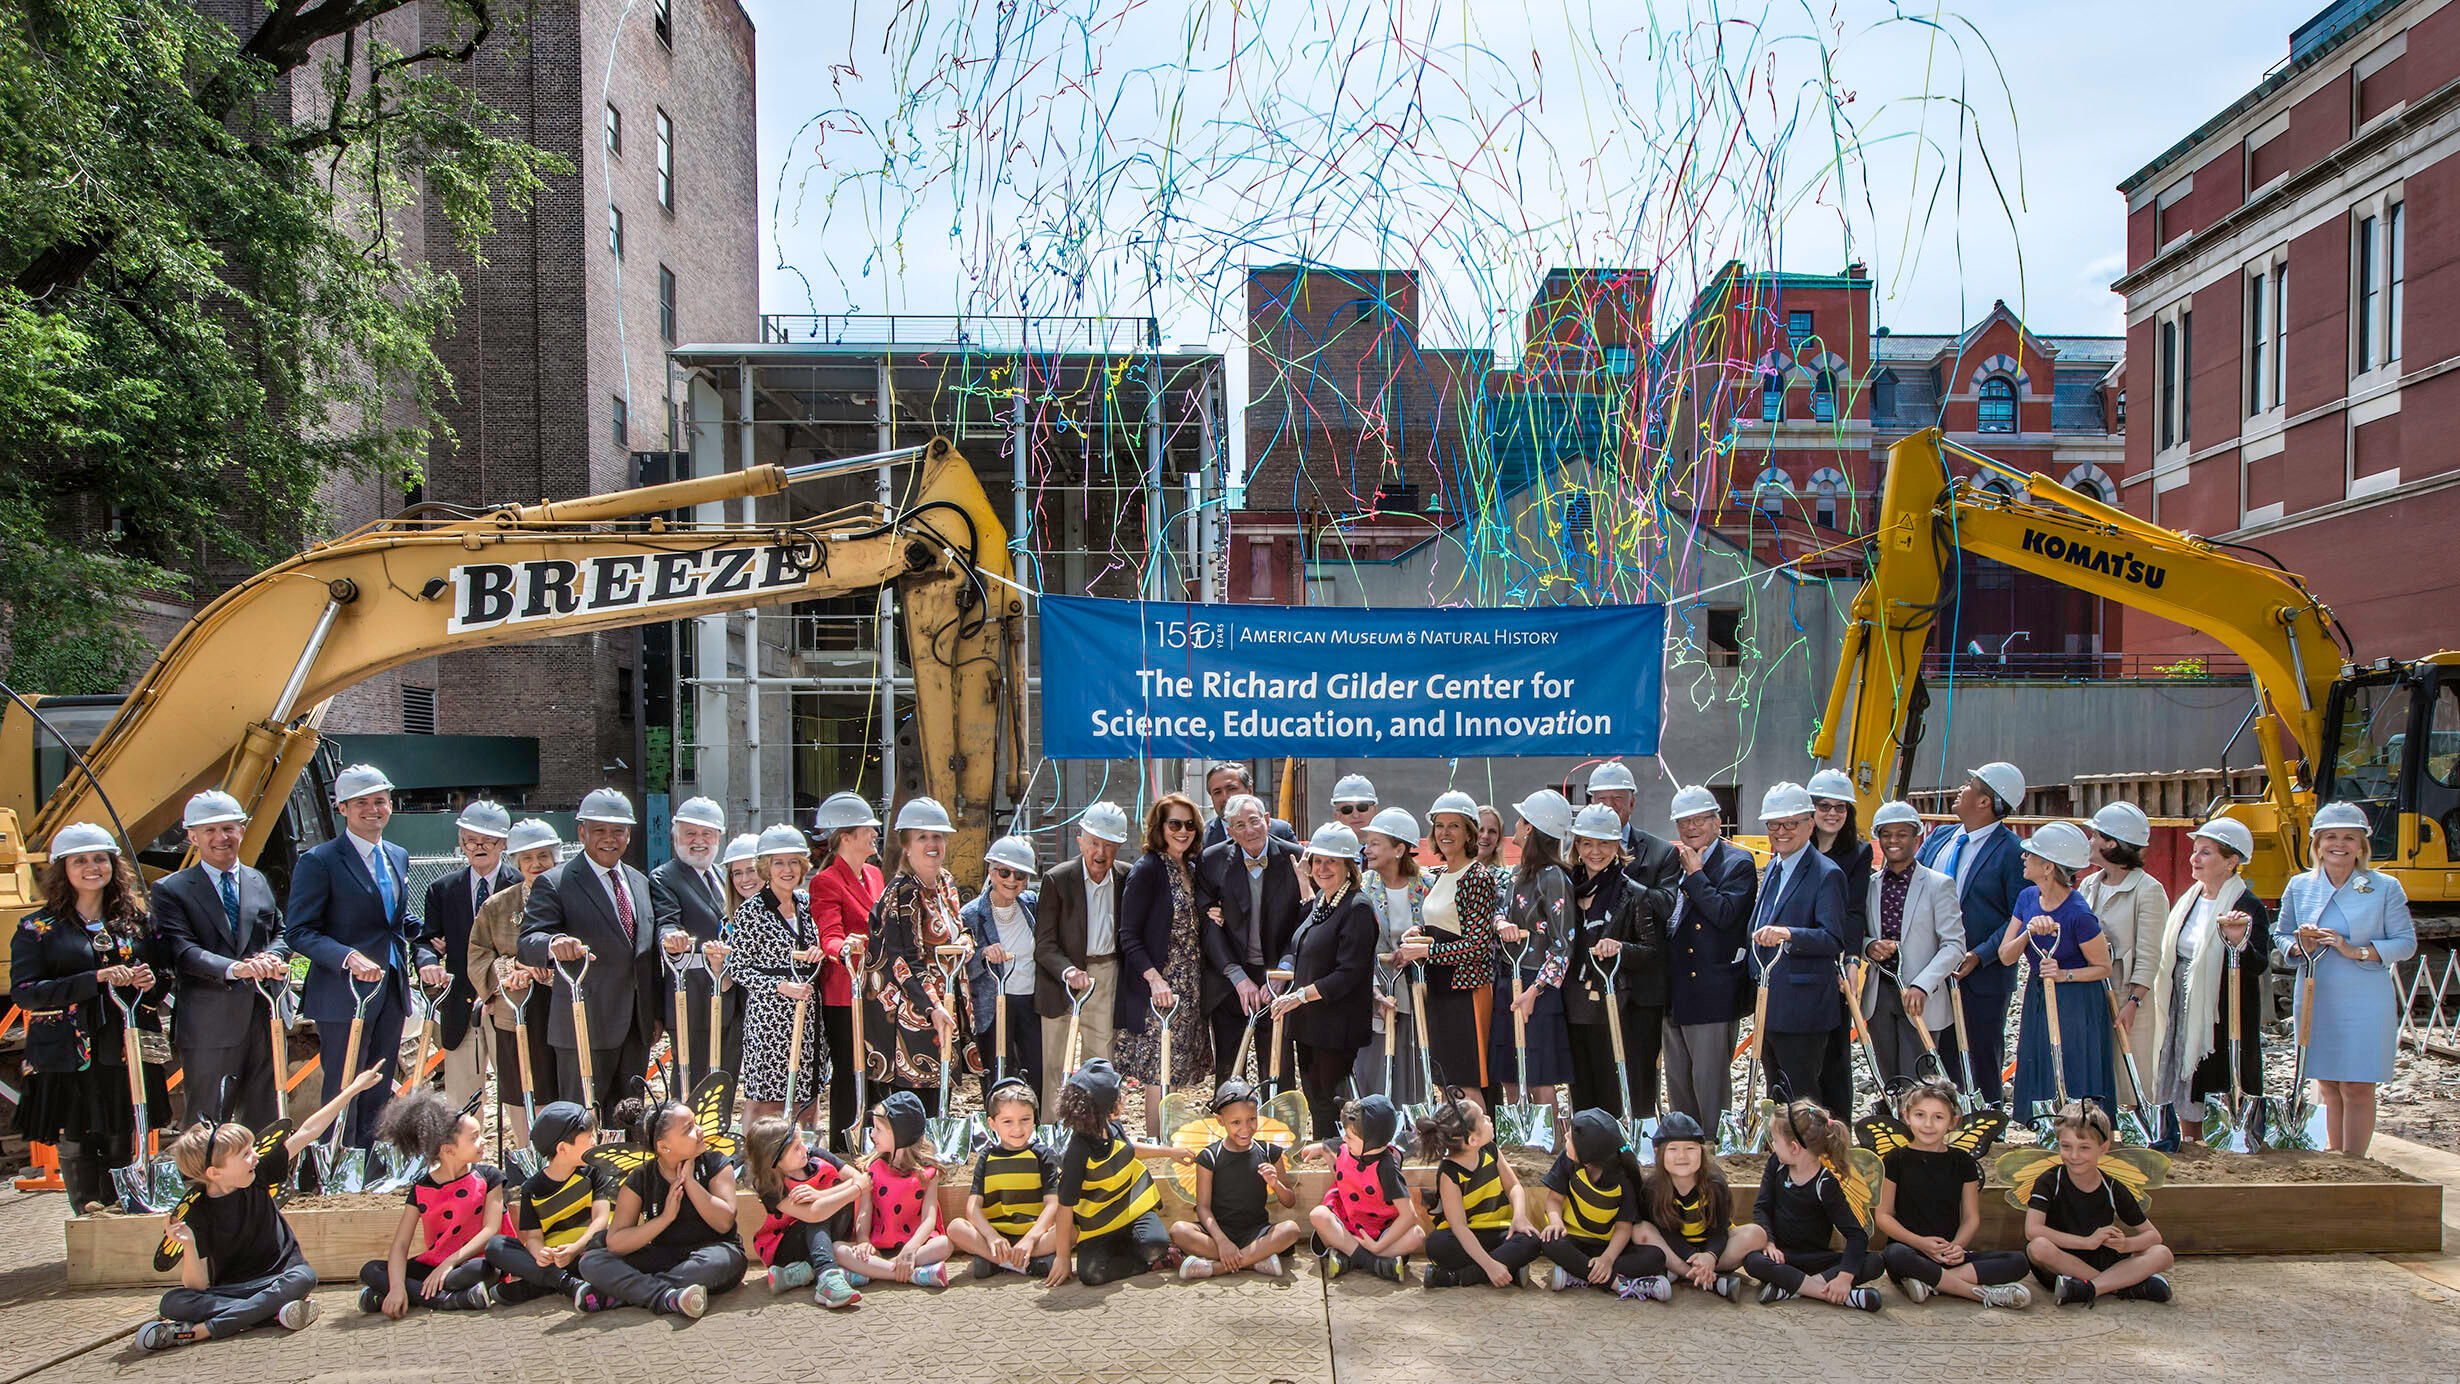 Group of people wearing hard hats and holding shovels, stand behind a group of seated children to commemorate the Gilder Center groundbreaking.